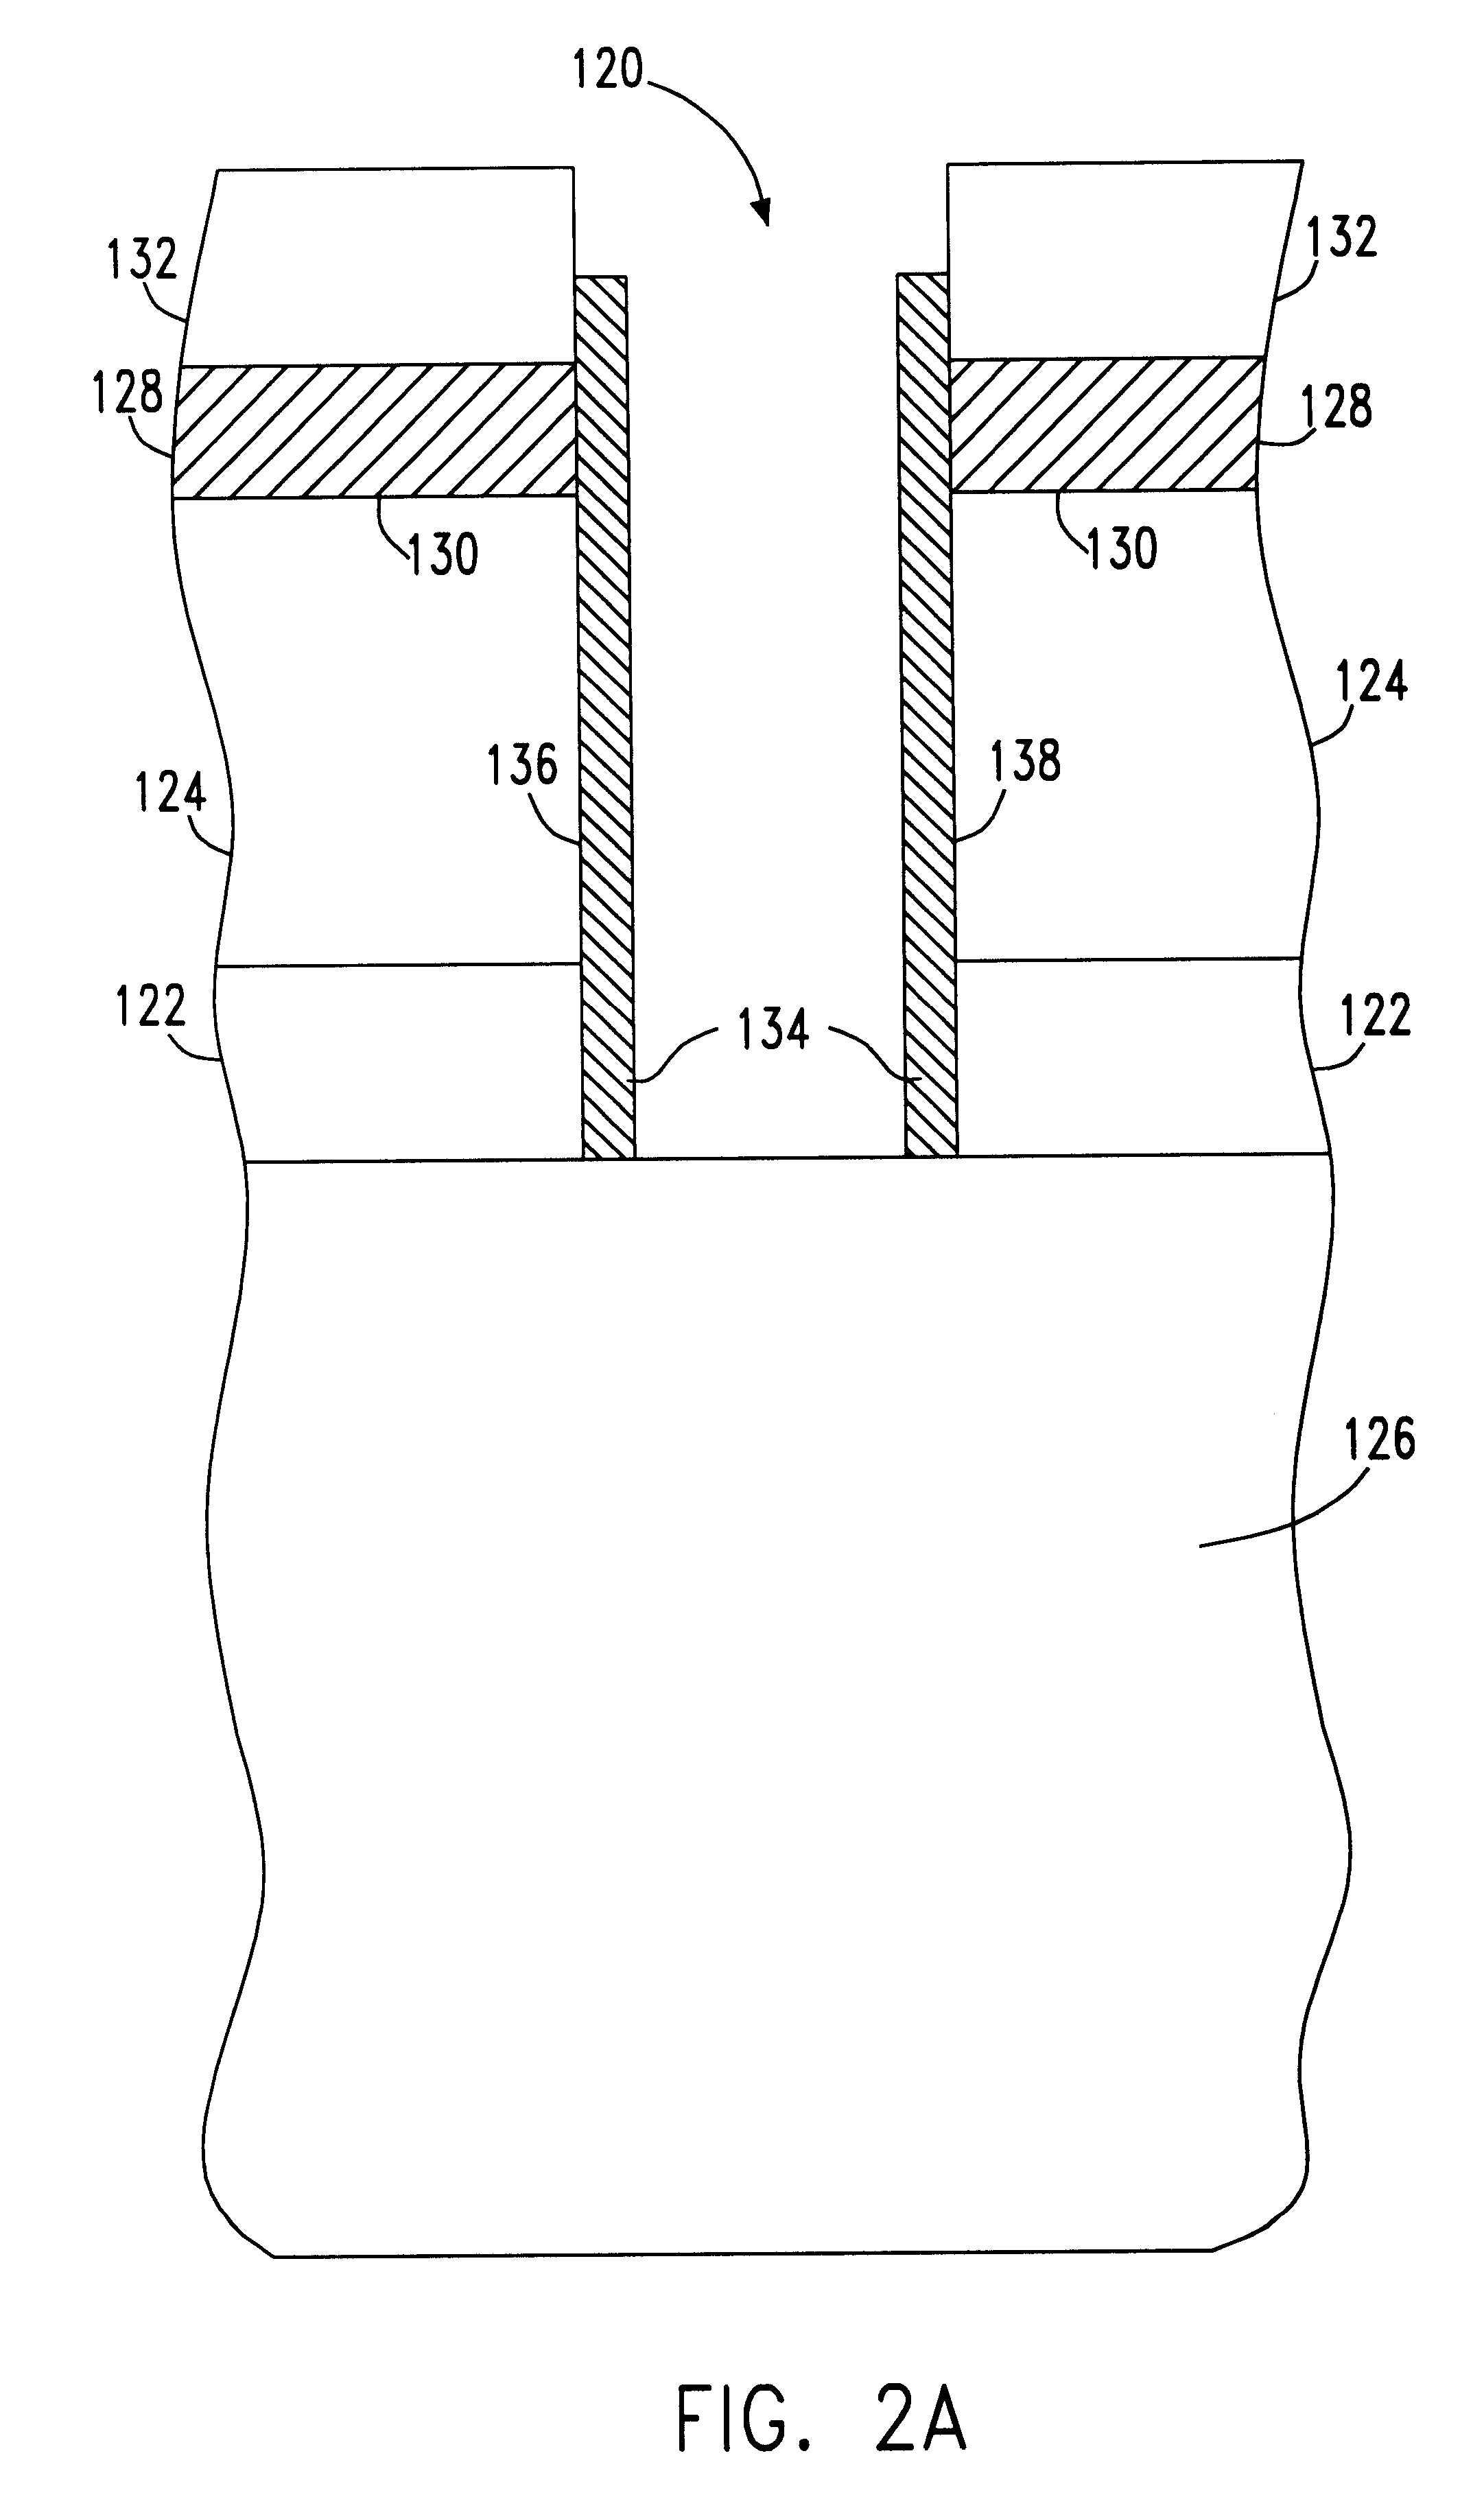 Silicon-on-insulator vertical array device trench capacitor DRAM